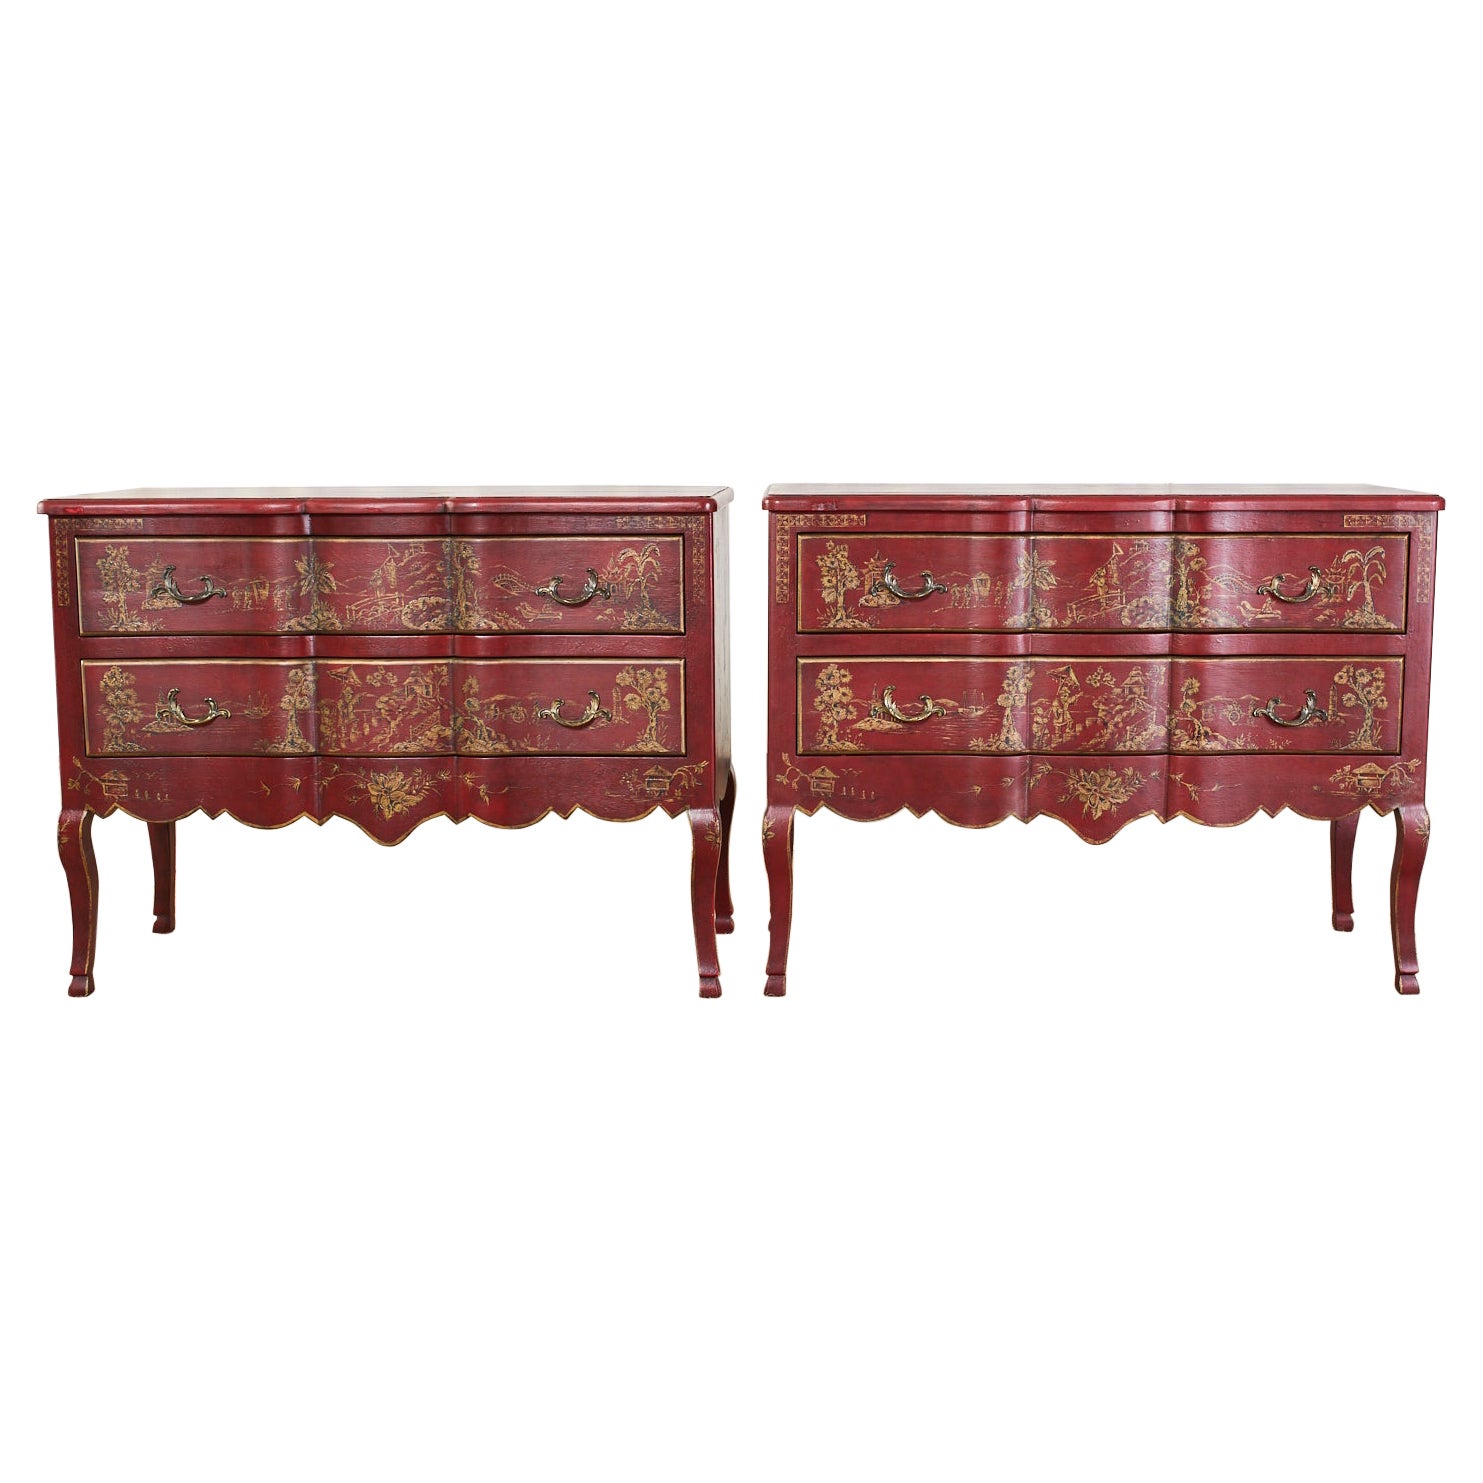 Pair of Chinoiserie Style Lacquered Chests by Amy Howard